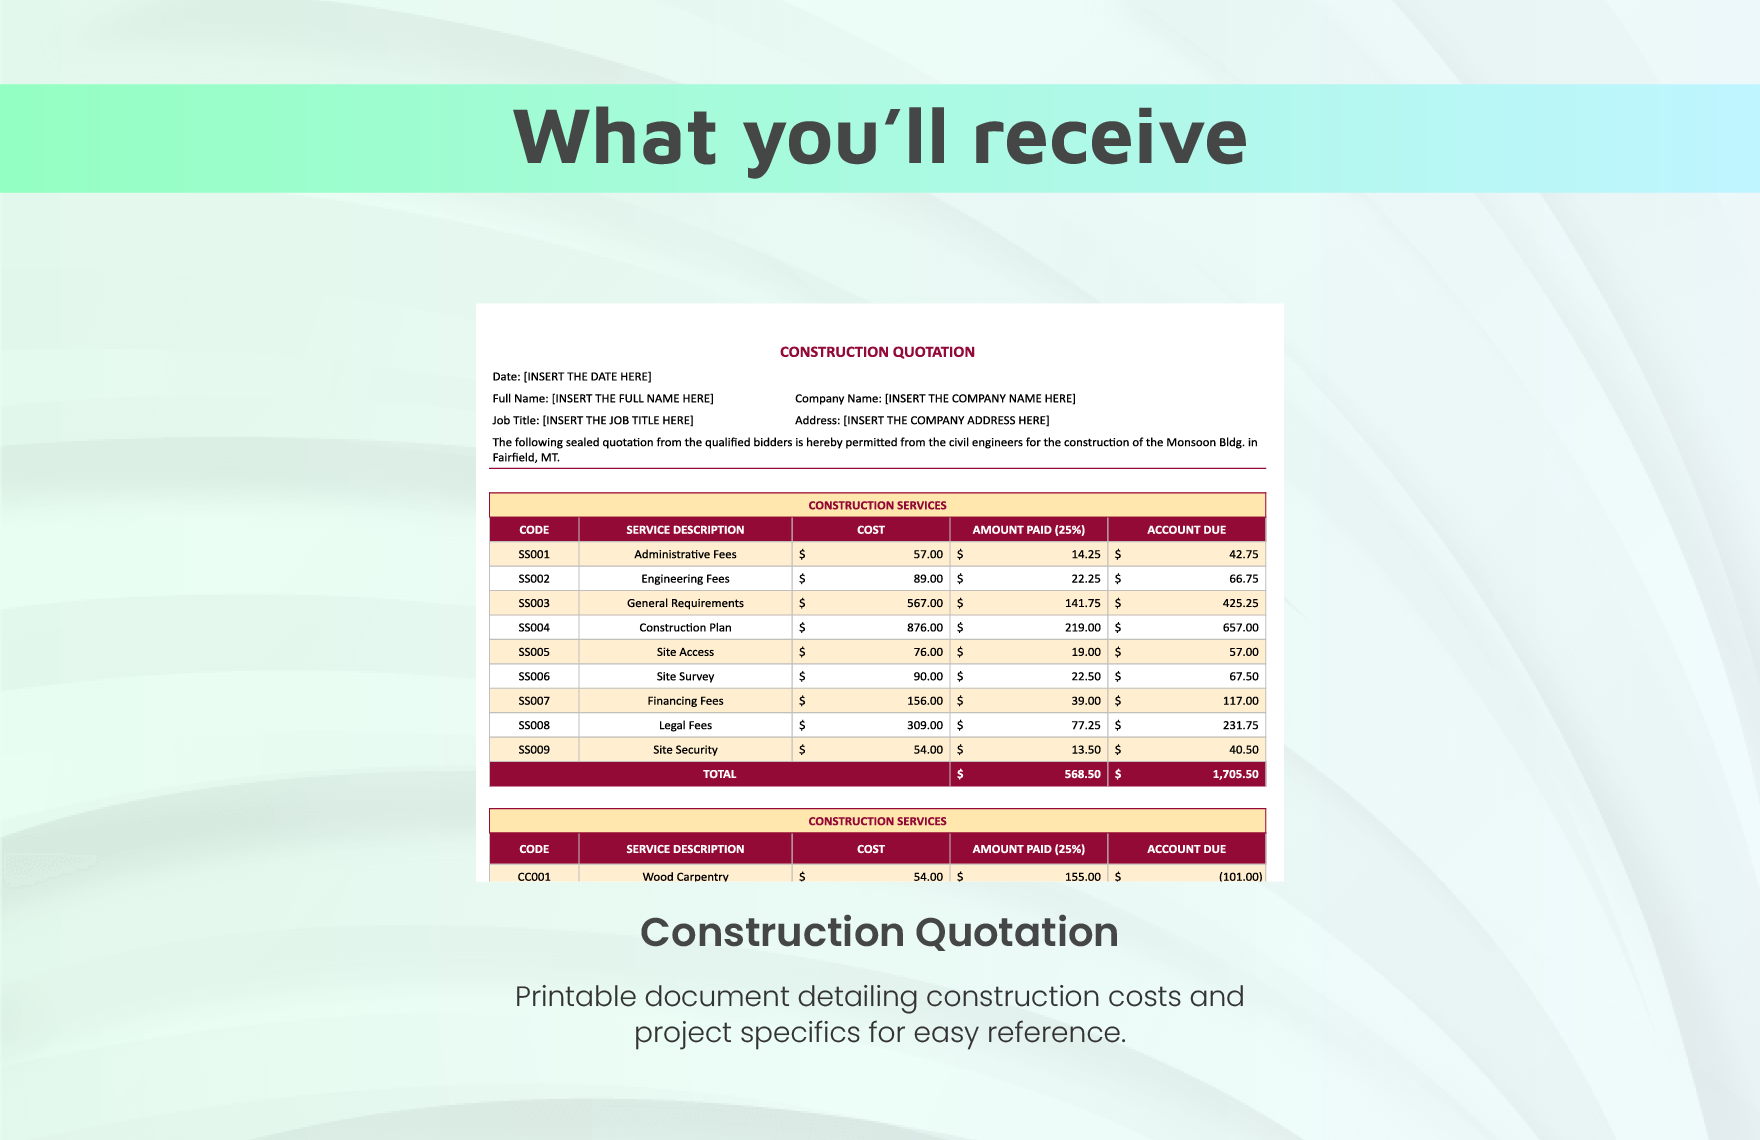 Printable Construction Quotation Template